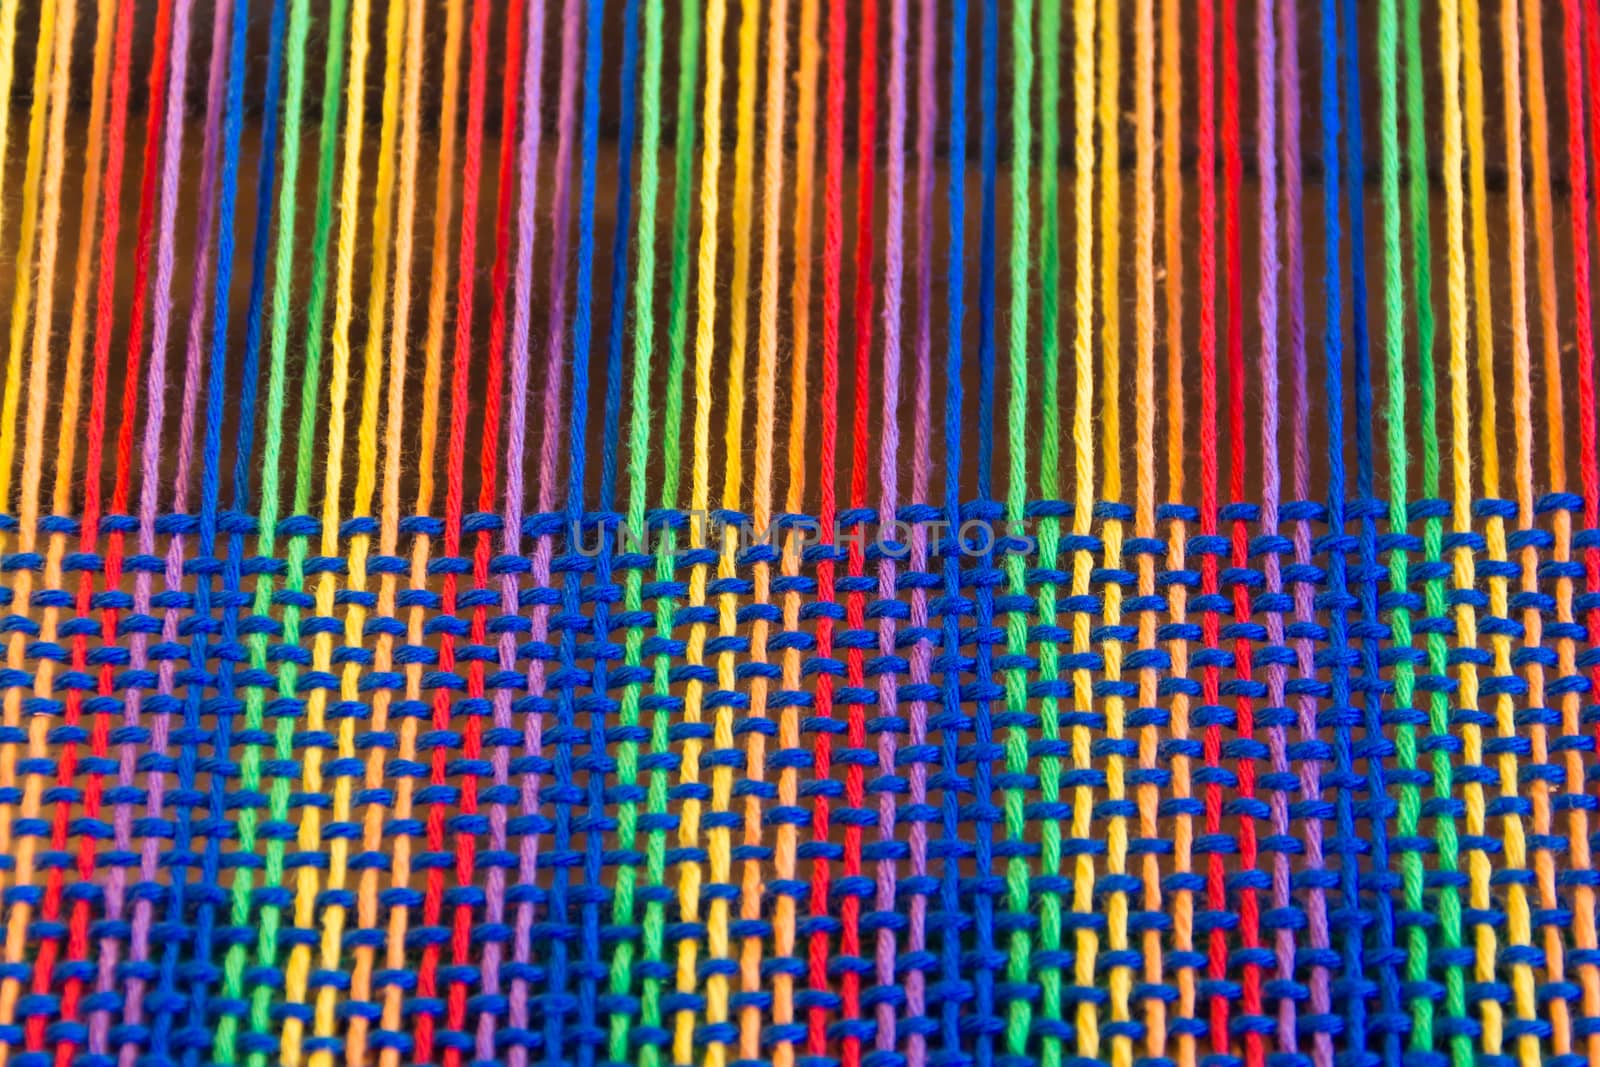 Comb loom with rainbow colors and diversity flag by GabrielaBertolini